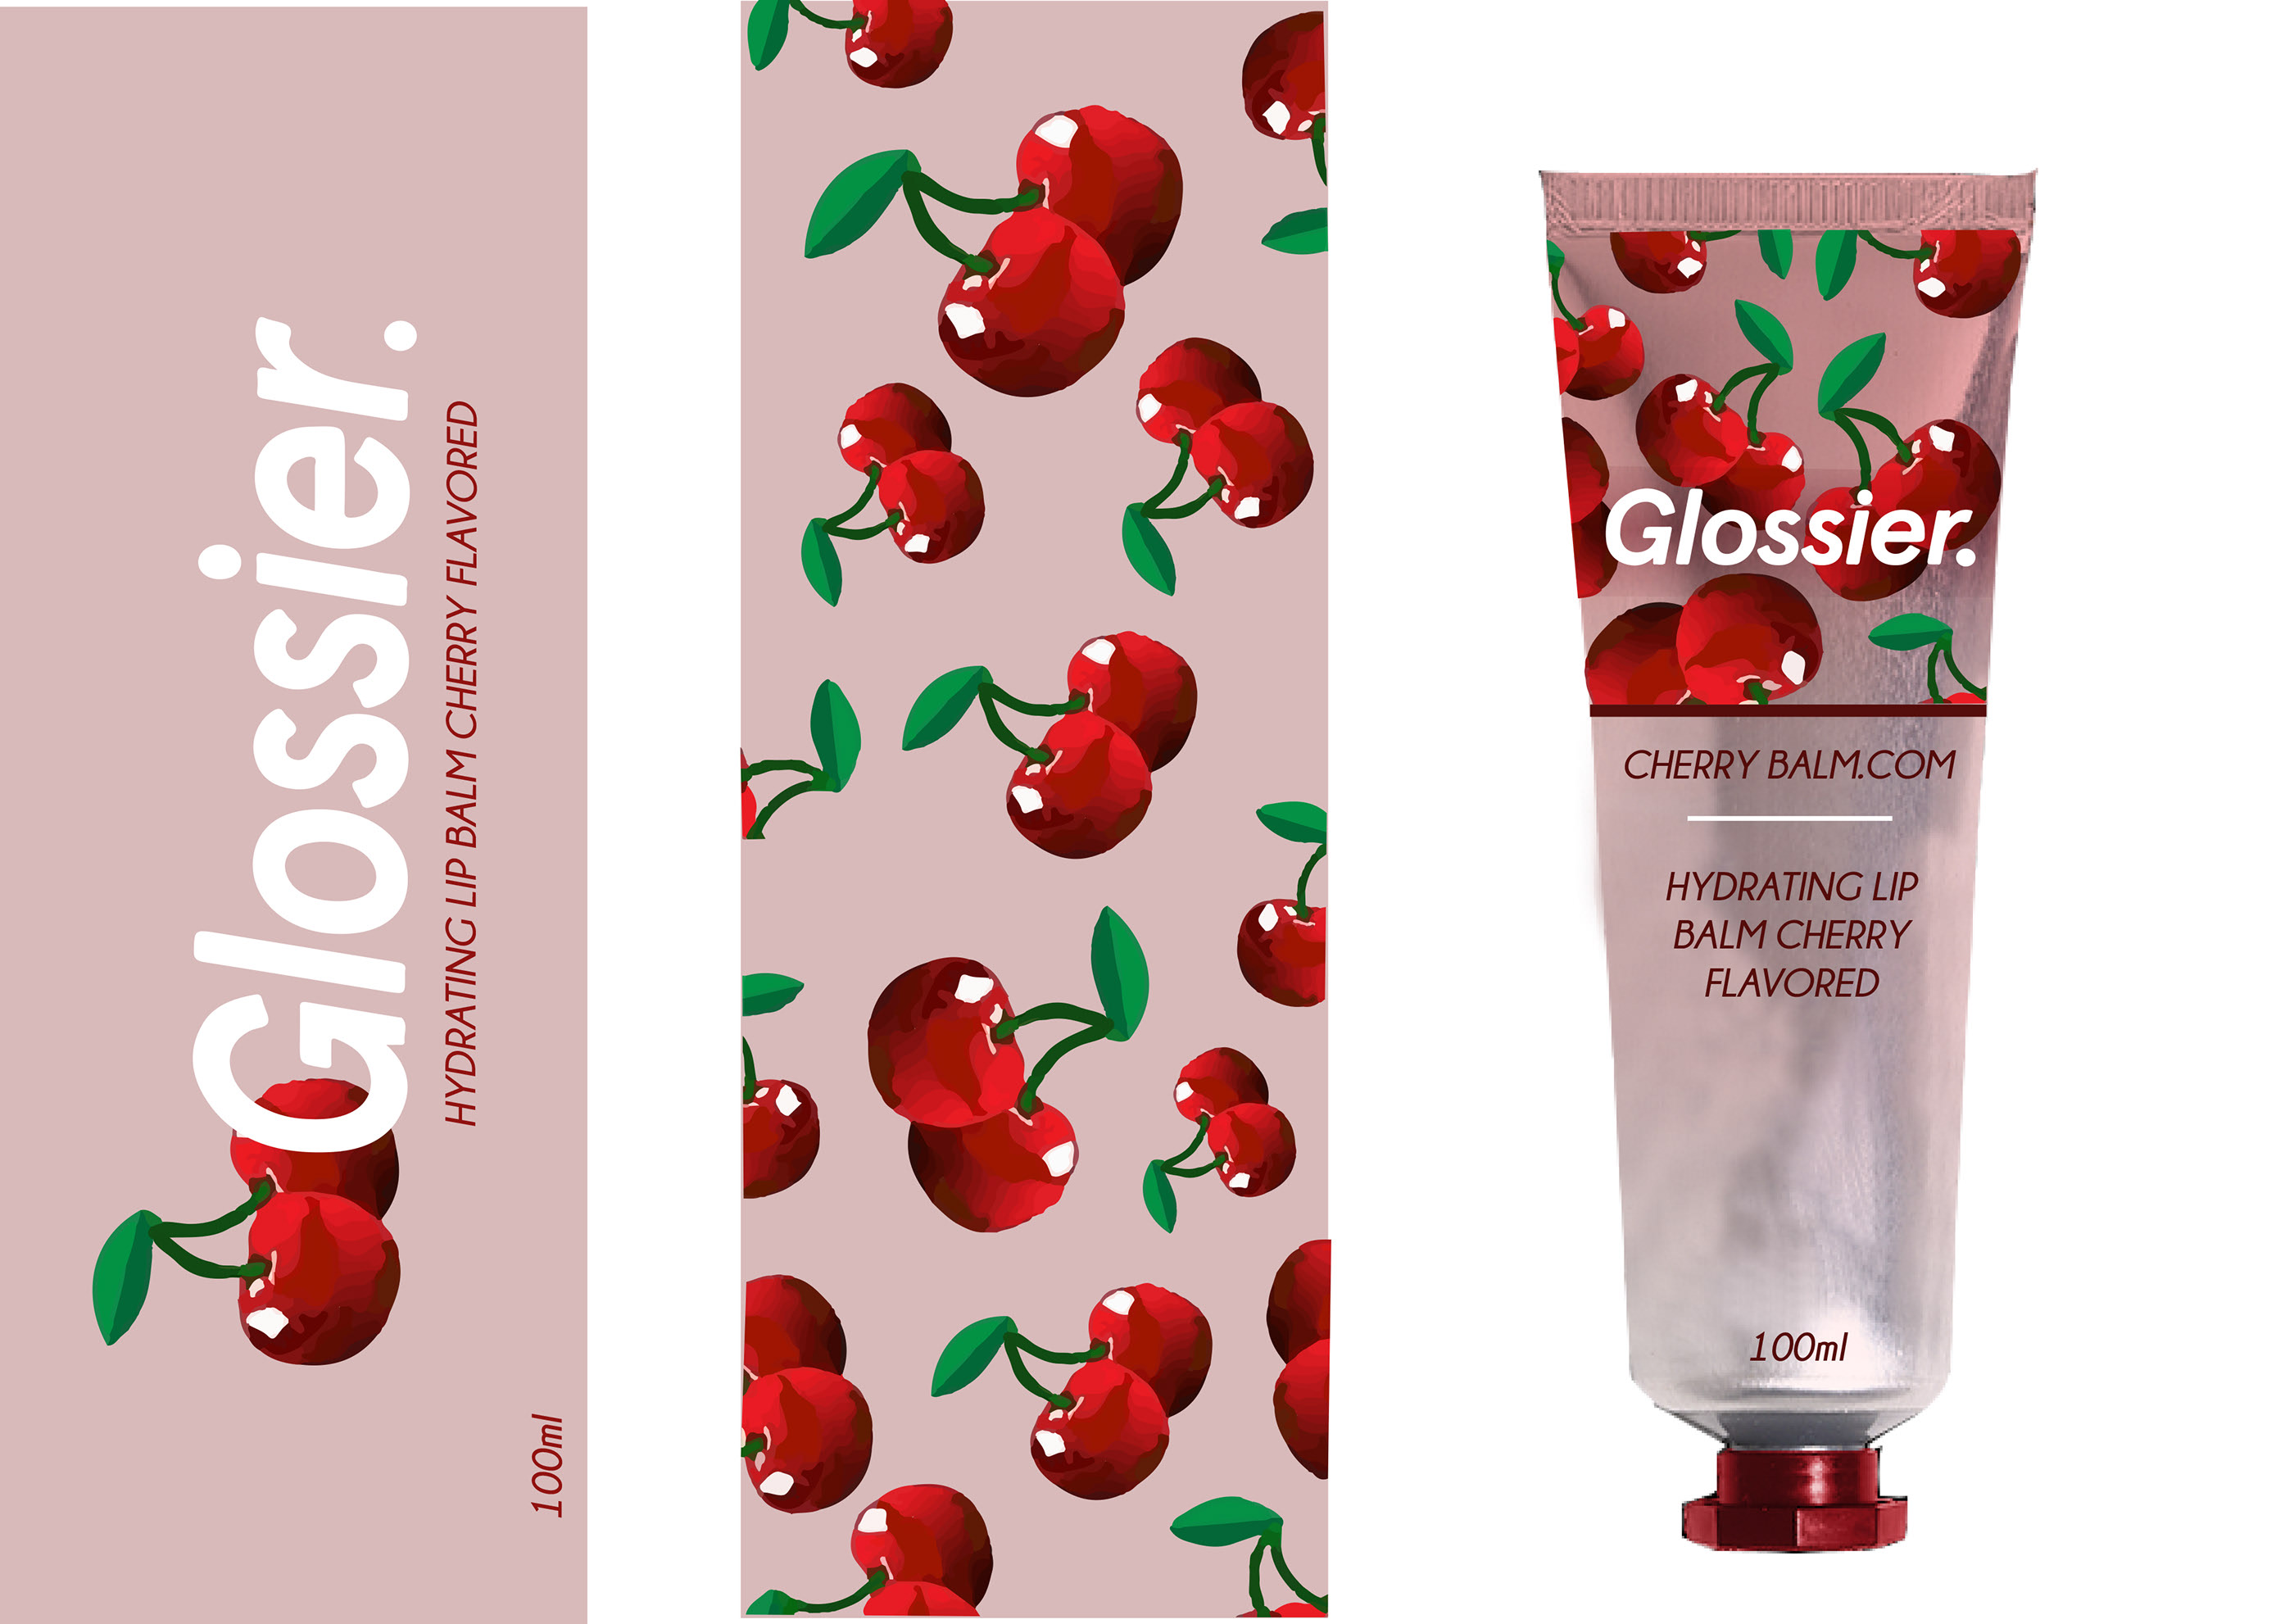 Product Redesign Glossier Cherry Balm dot com on Behance